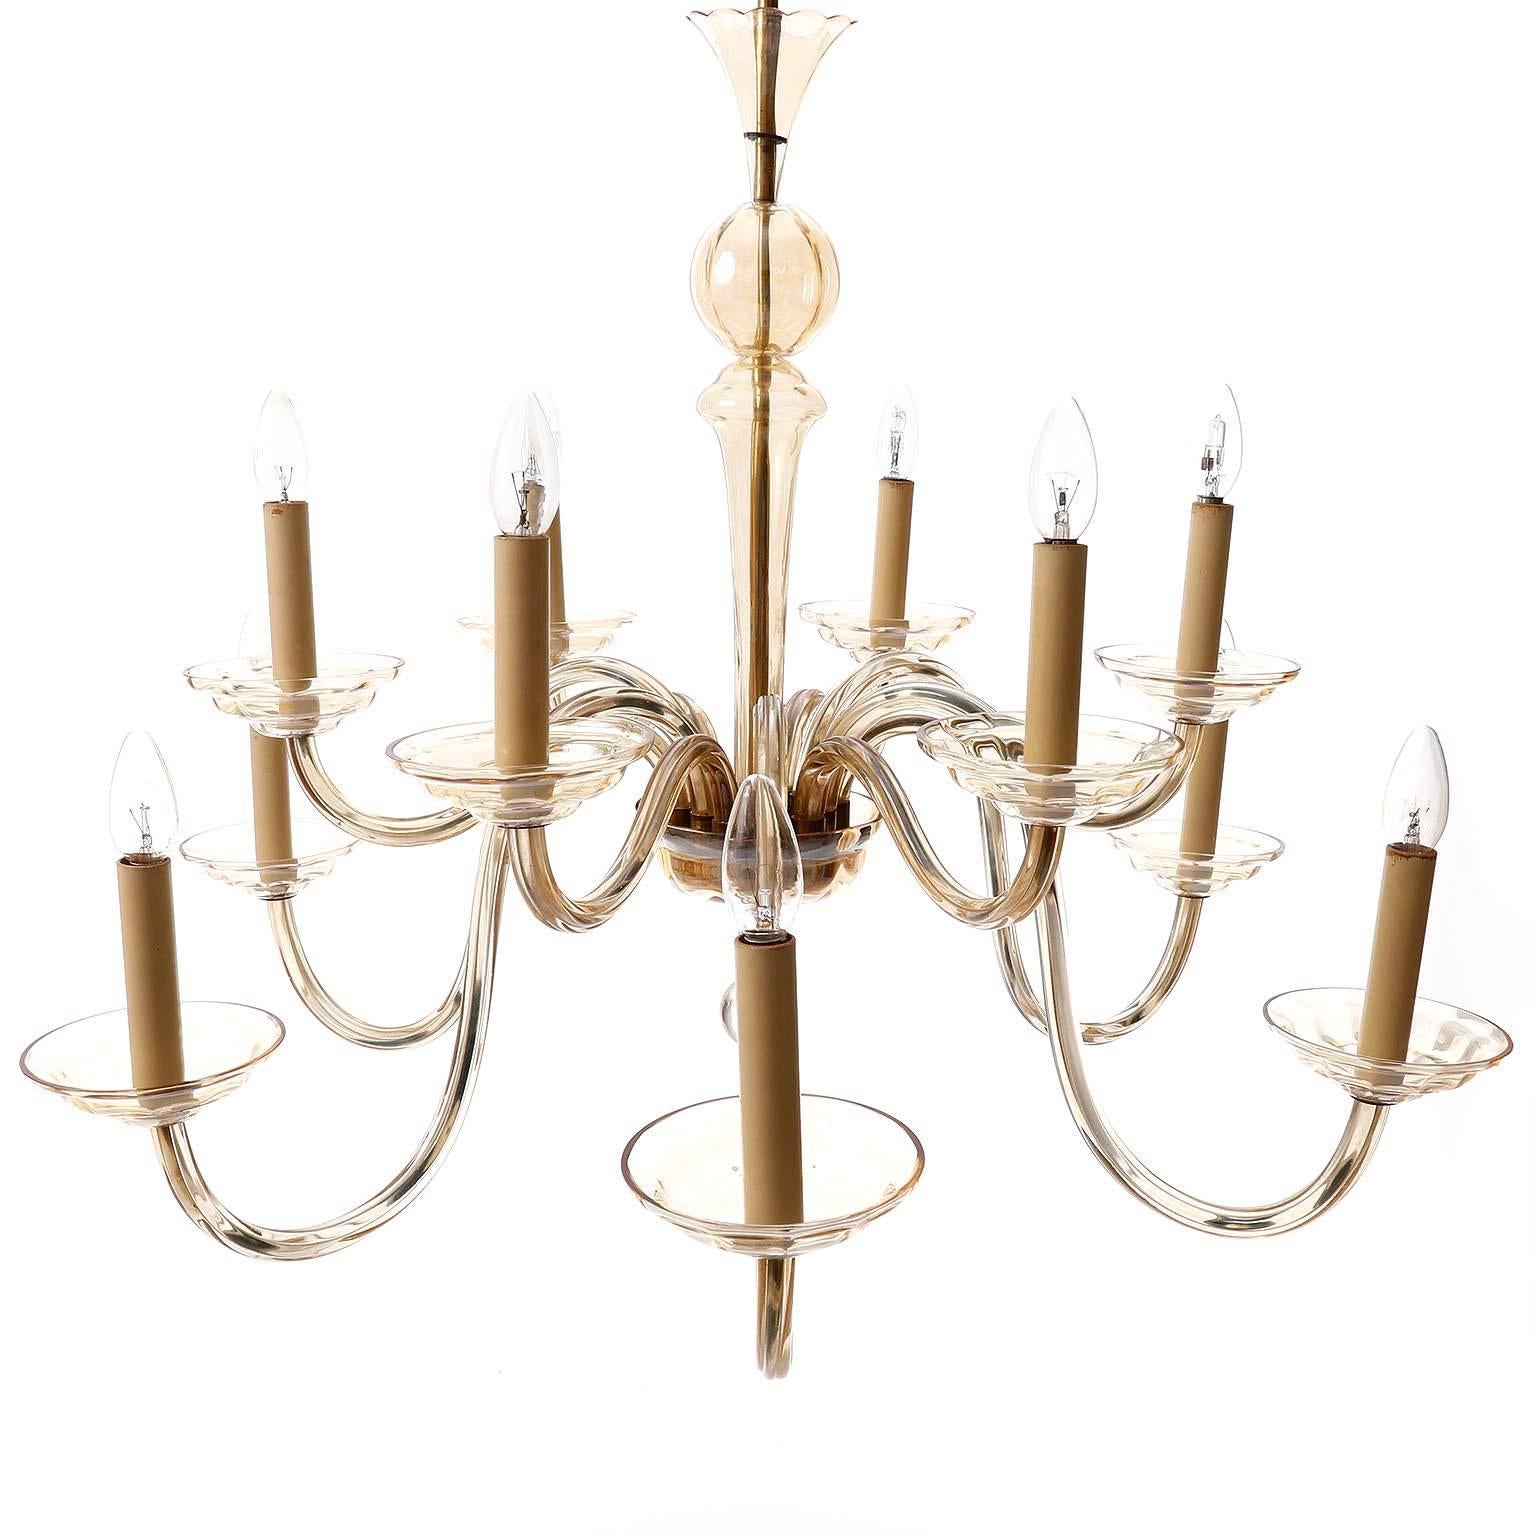 A beautiful and large Art Deco light fixture by J.L. Lobmeyr, Vienna, Austria, 1930s. This chandelier has twelve arms with sockets for candelabra E14 screws base bulbs (LED or filament). It is made of brass with lovely natural aged patina and